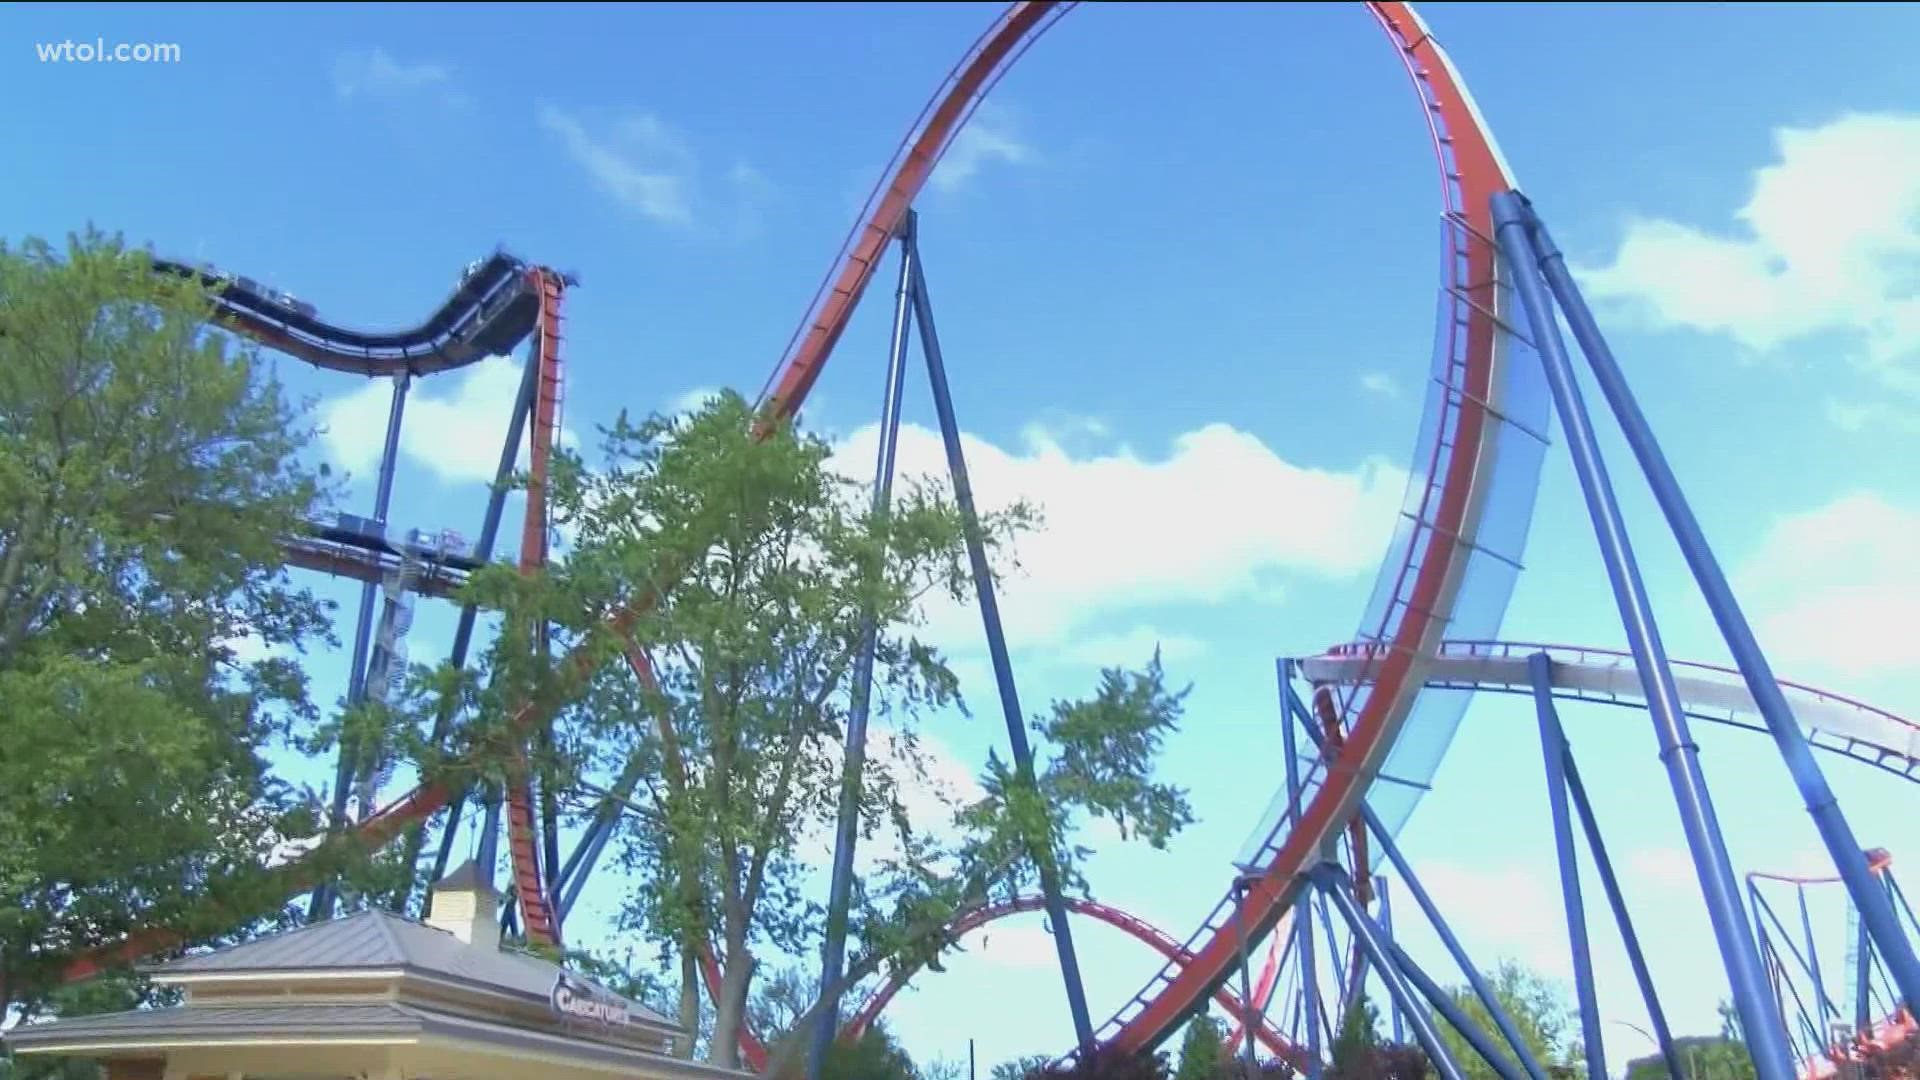 After a Michigan woman was hit by a piece of metal from the Top Thrill Dragster ride at Cedar Point, state investigators have just released their findings.